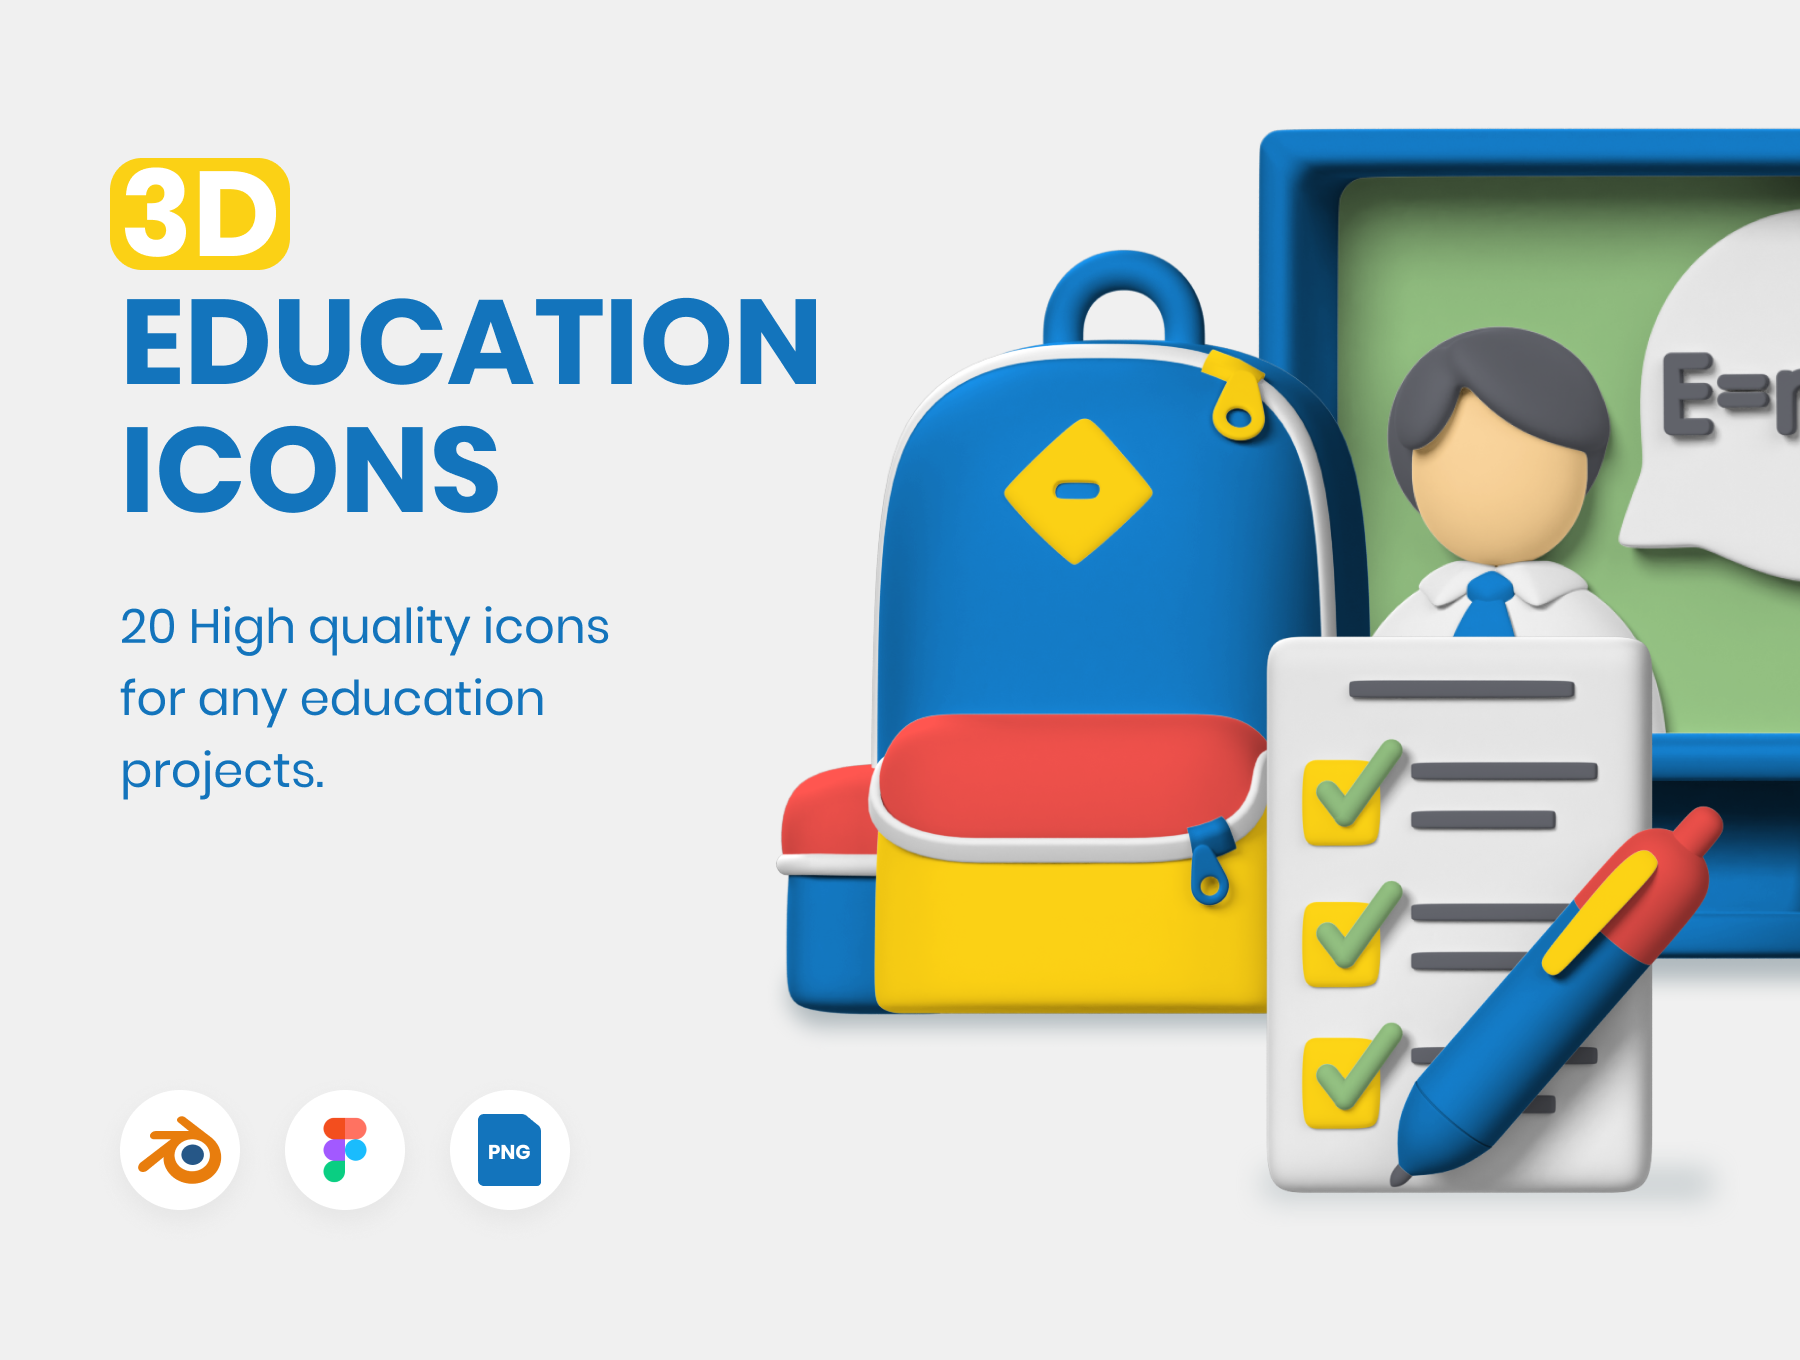 3d-education-icons-cover_1617090433544